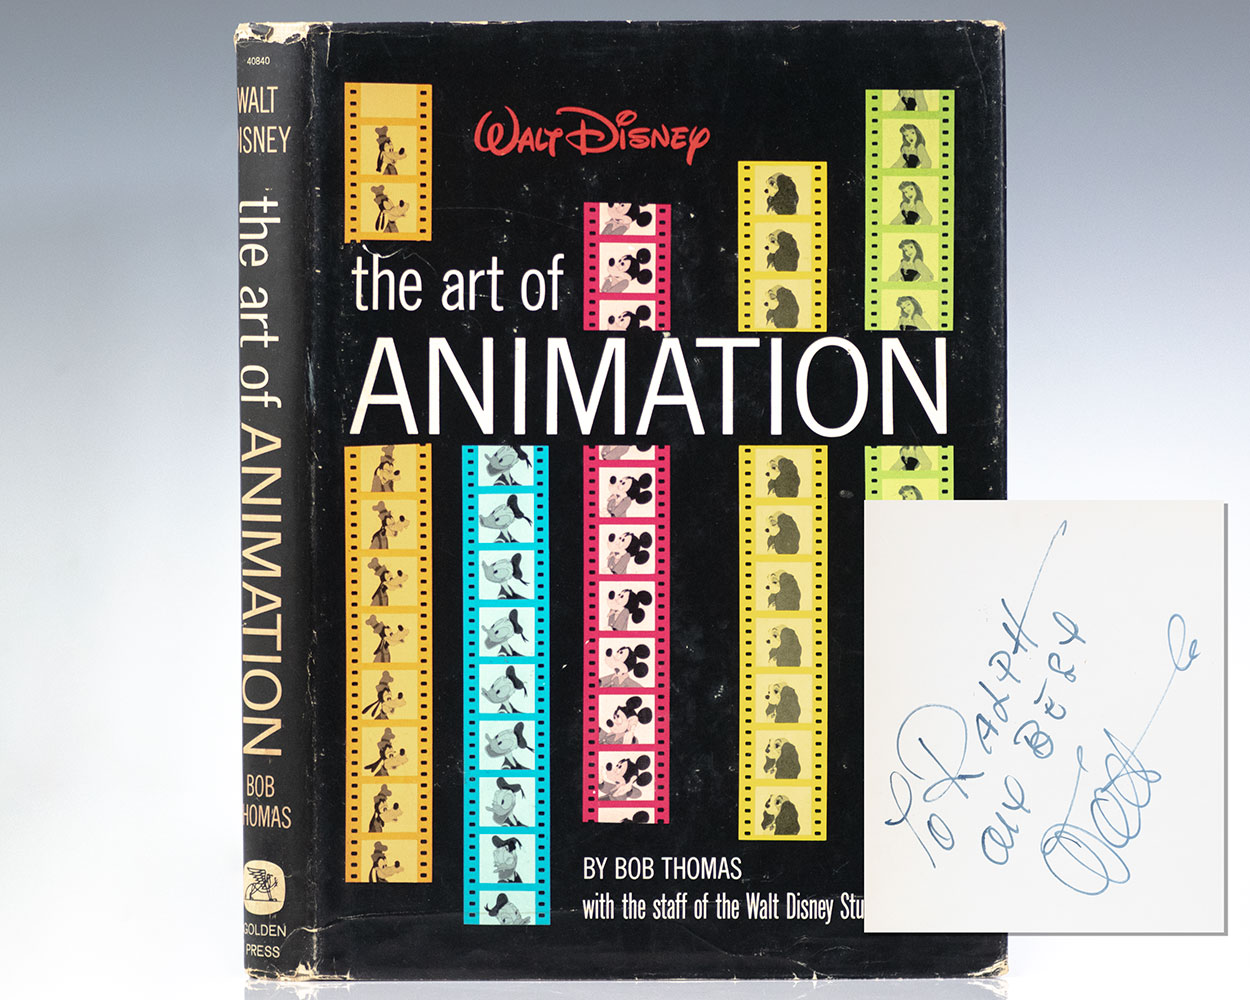 First Edition Disney's Art of Animation Book!